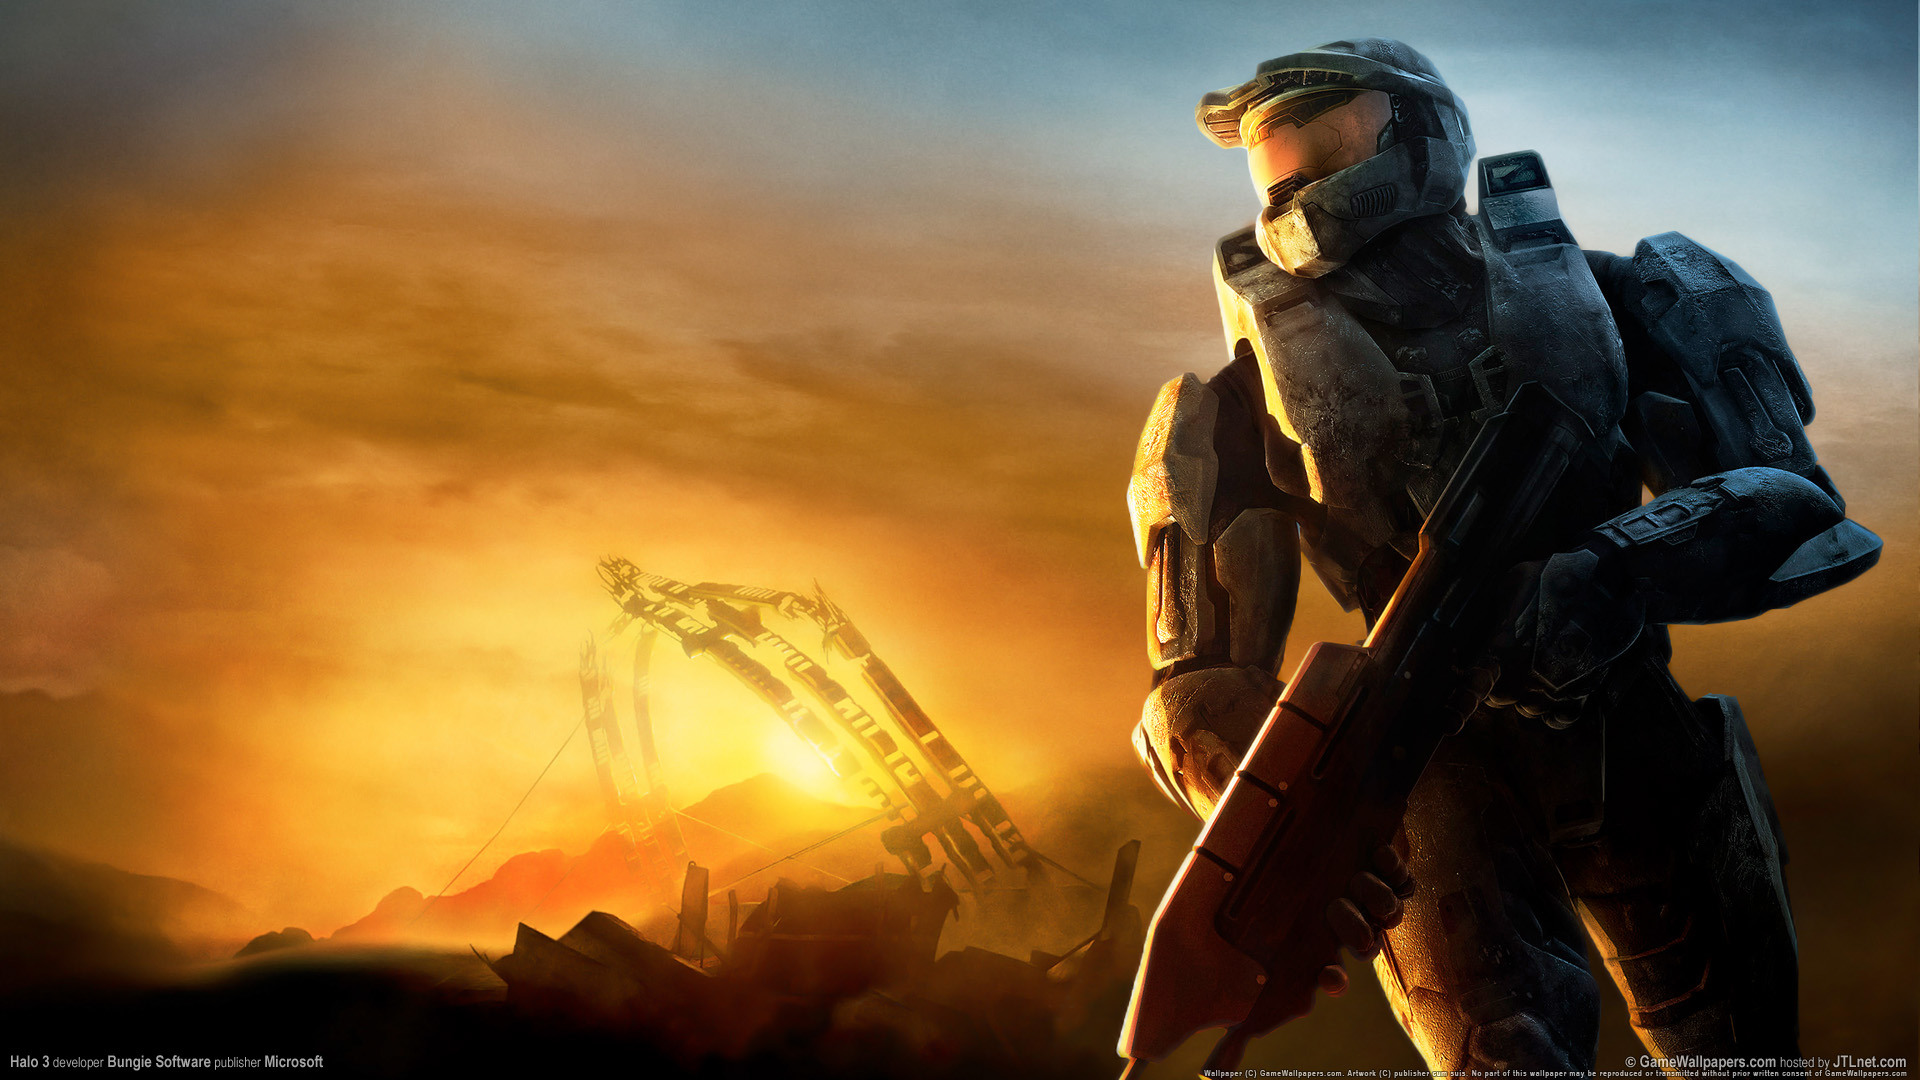 Halo Wallpaper 1080p by Playbox36 on DeviantArt